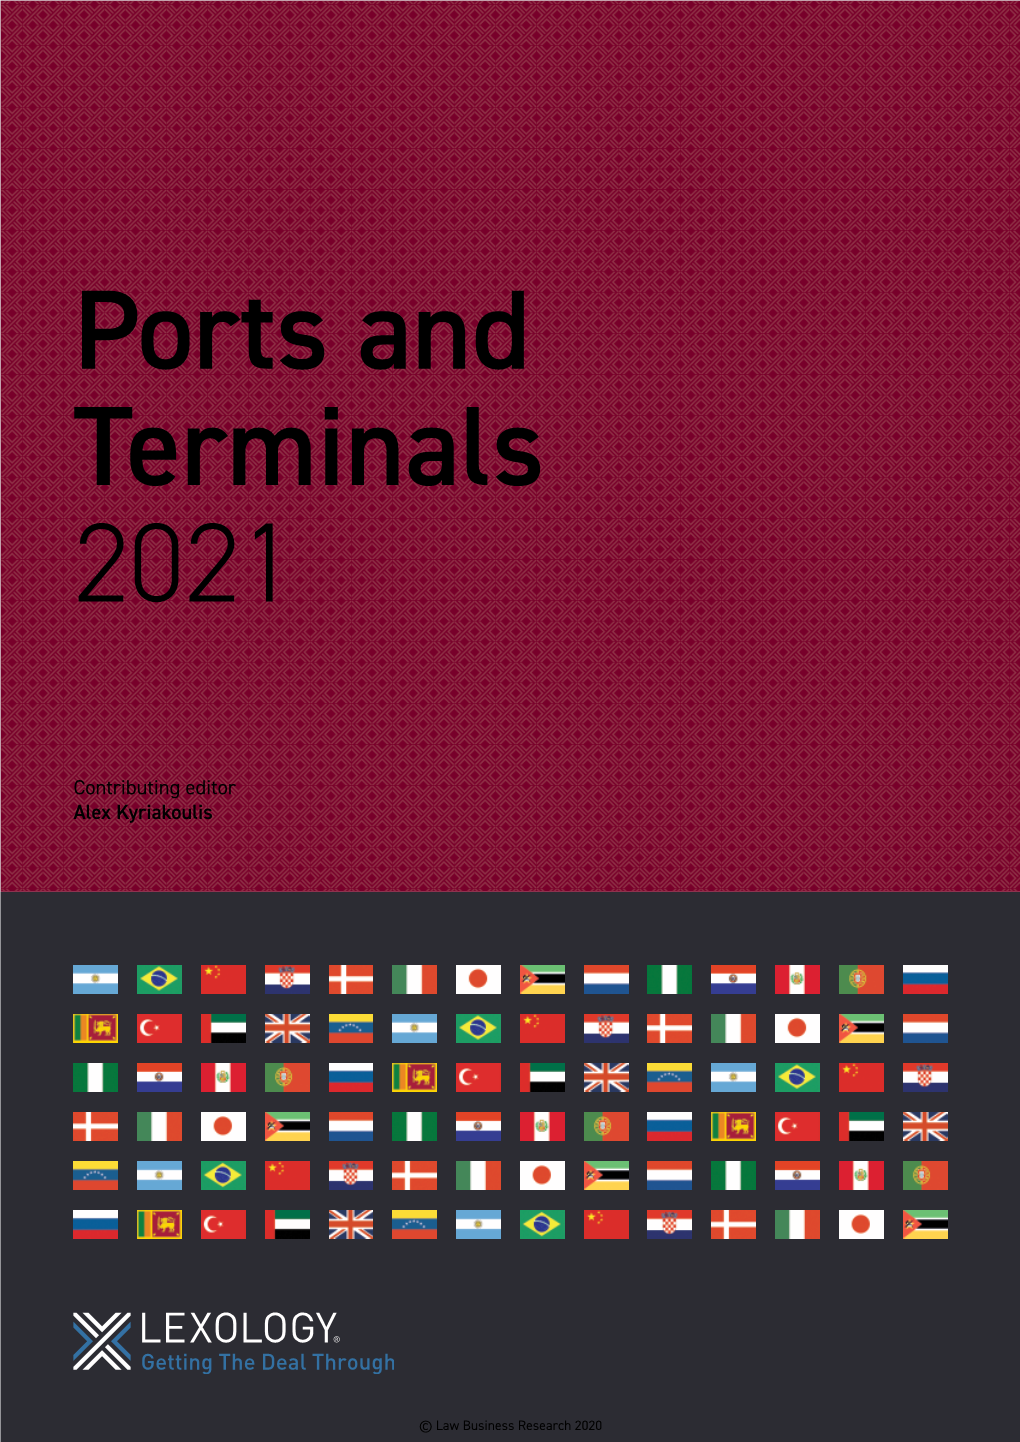 Ports and Terminals 2021 Ports and Terminals 2021